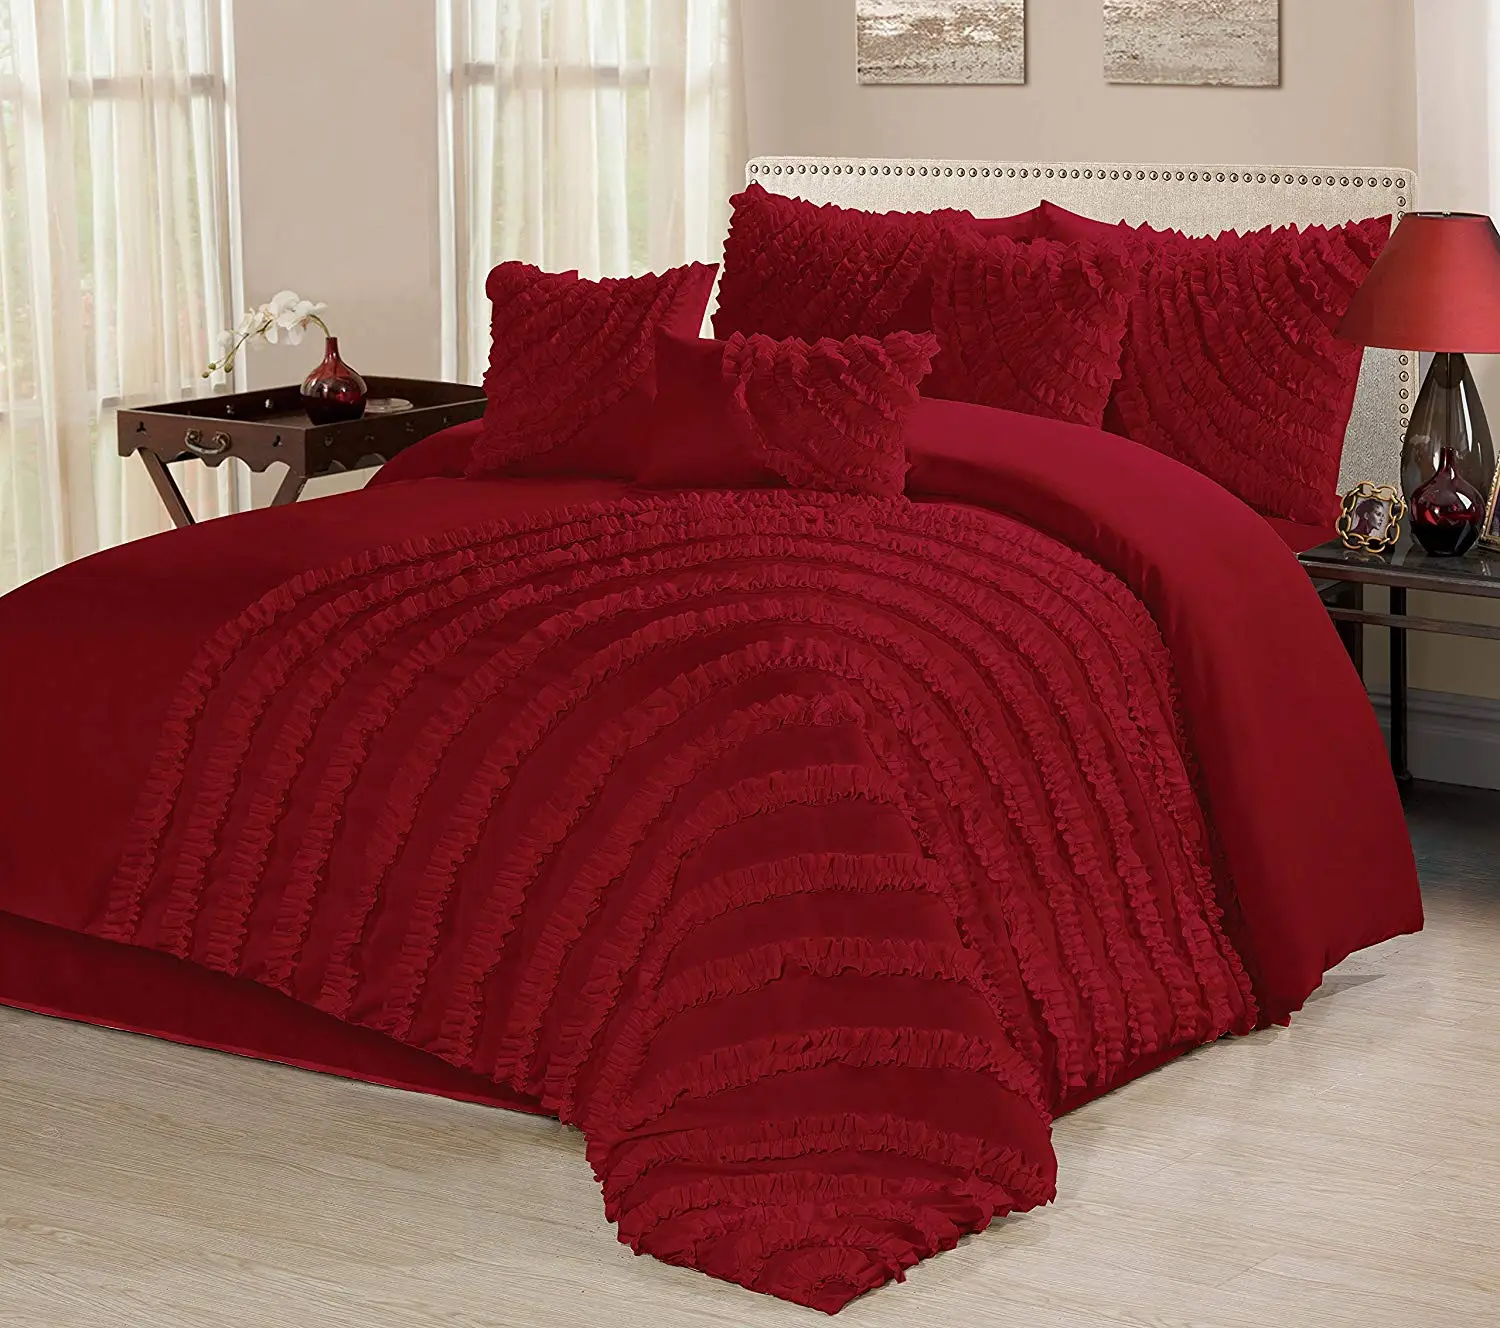 Cheap Red Cal King Comforter Sets, find Red Cal King Comforter Sets deals on line at www.bagssaleusa.com